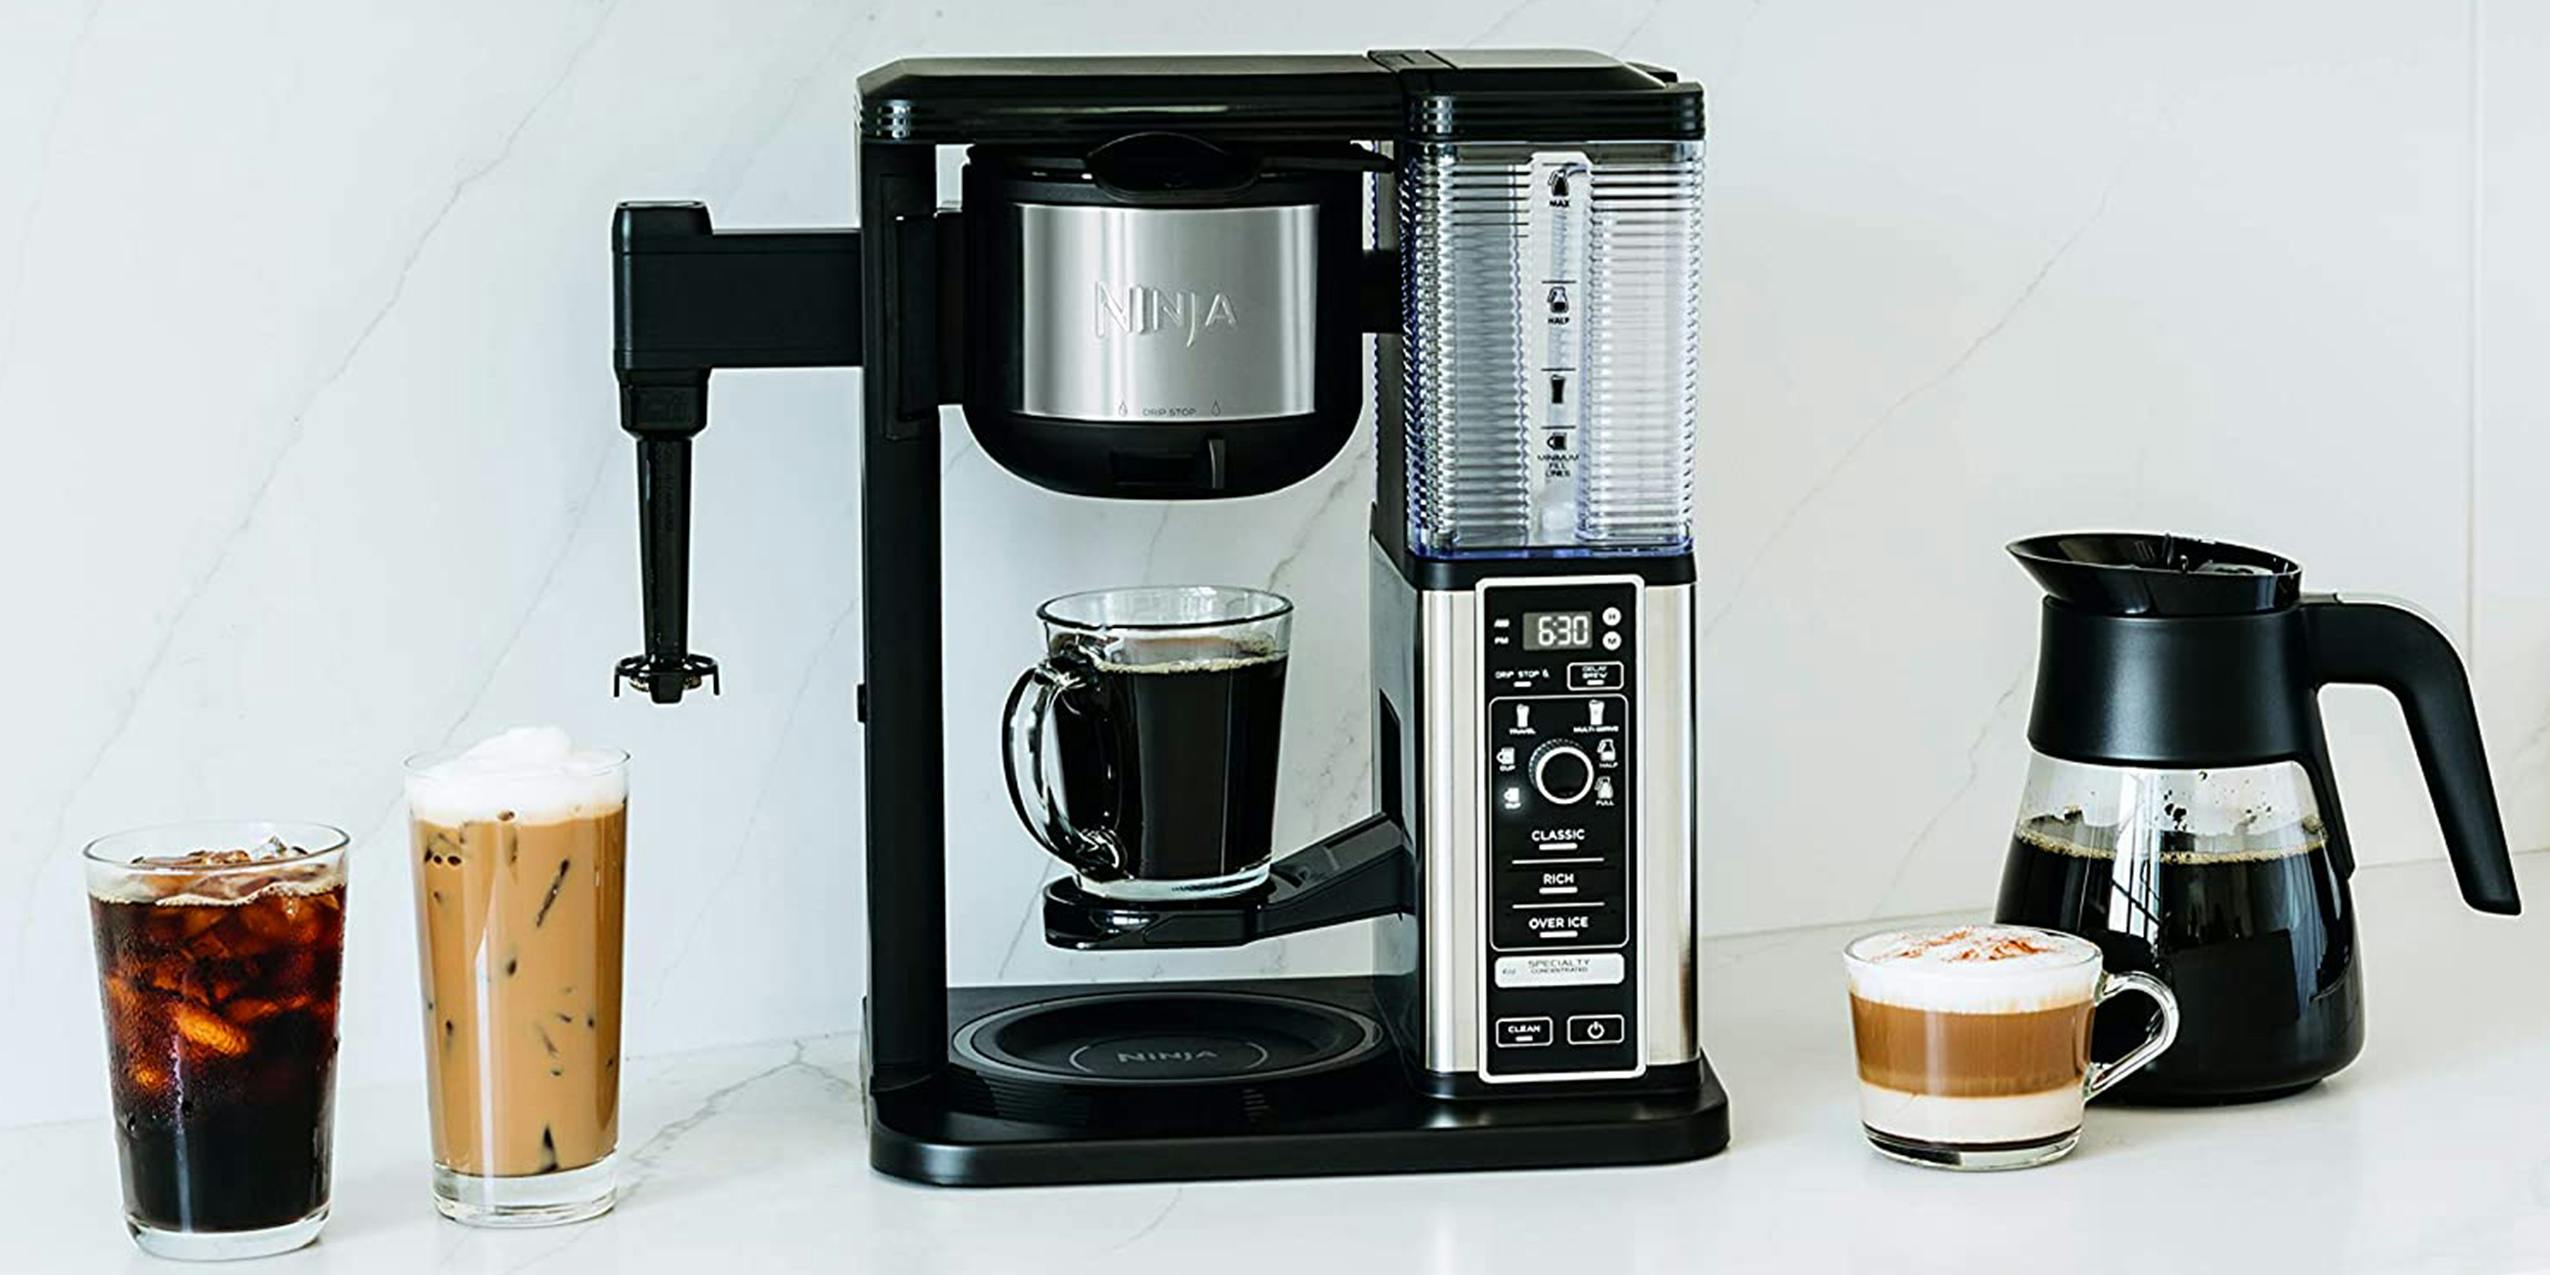 Ninja Coffee Maker along with a few of the drinks the device can make is one of the best Christmas gifts for dad.